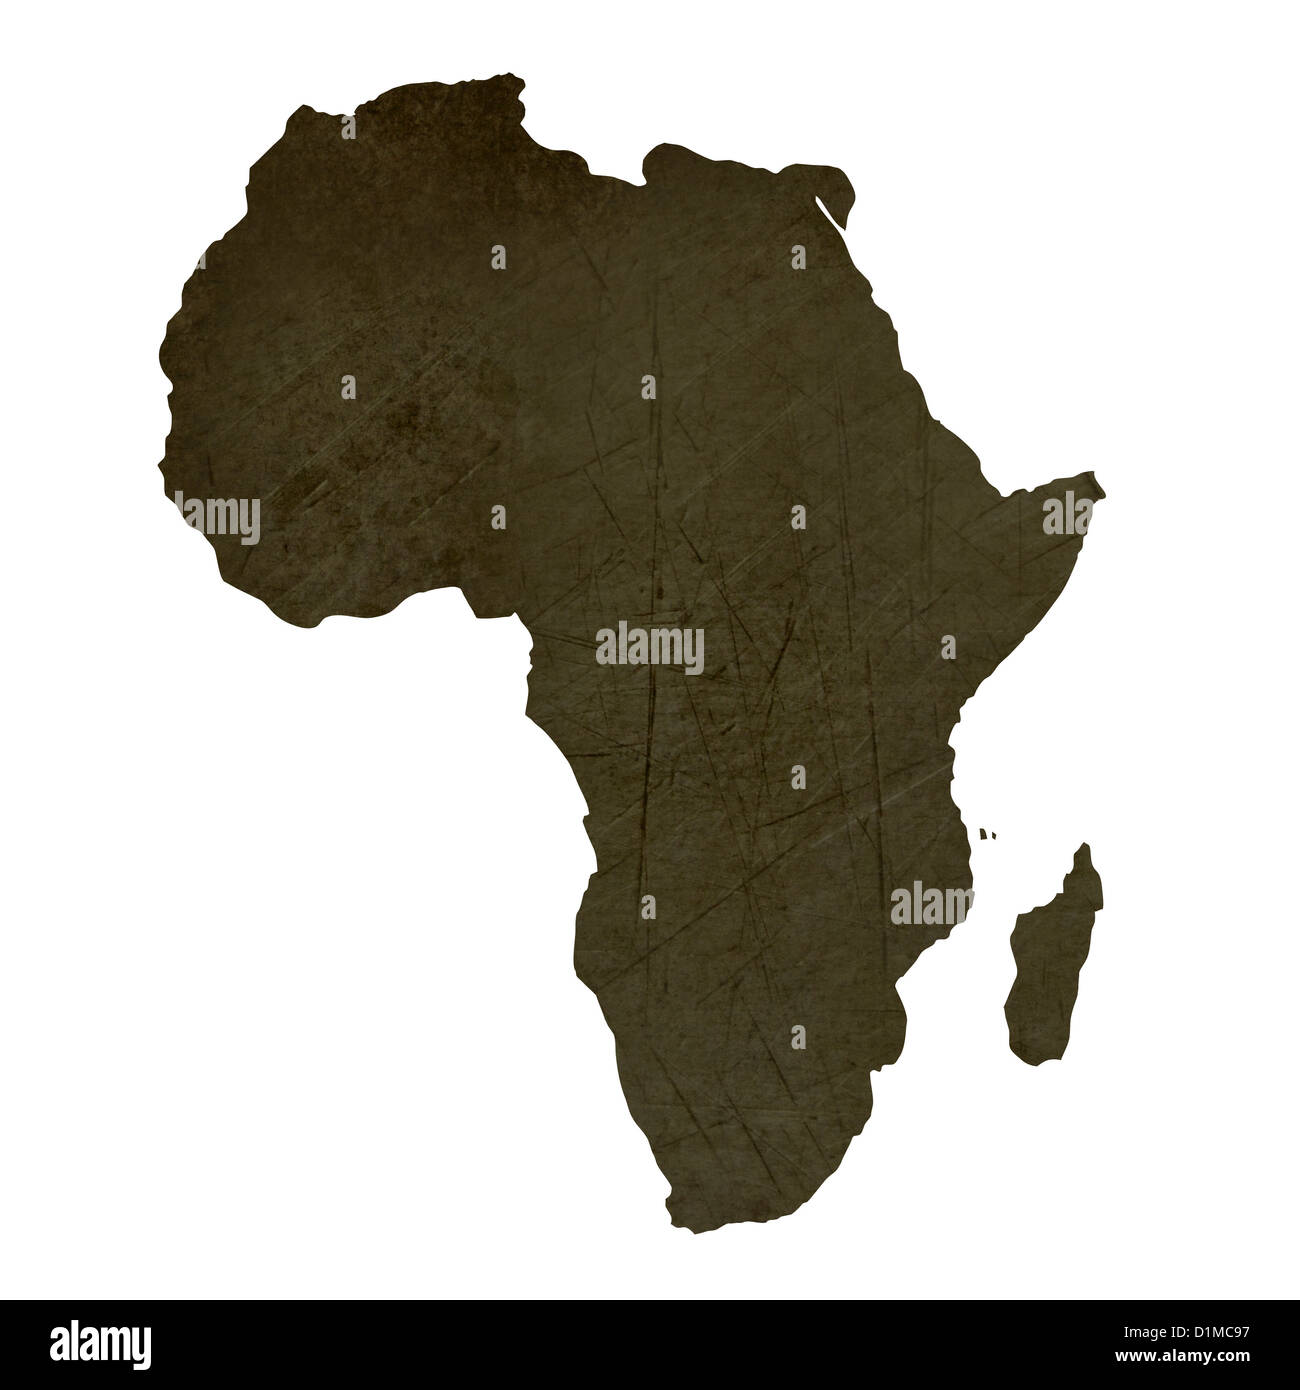 Dark silhouetted and textured map of African continent isolated on white background. Stock Photo